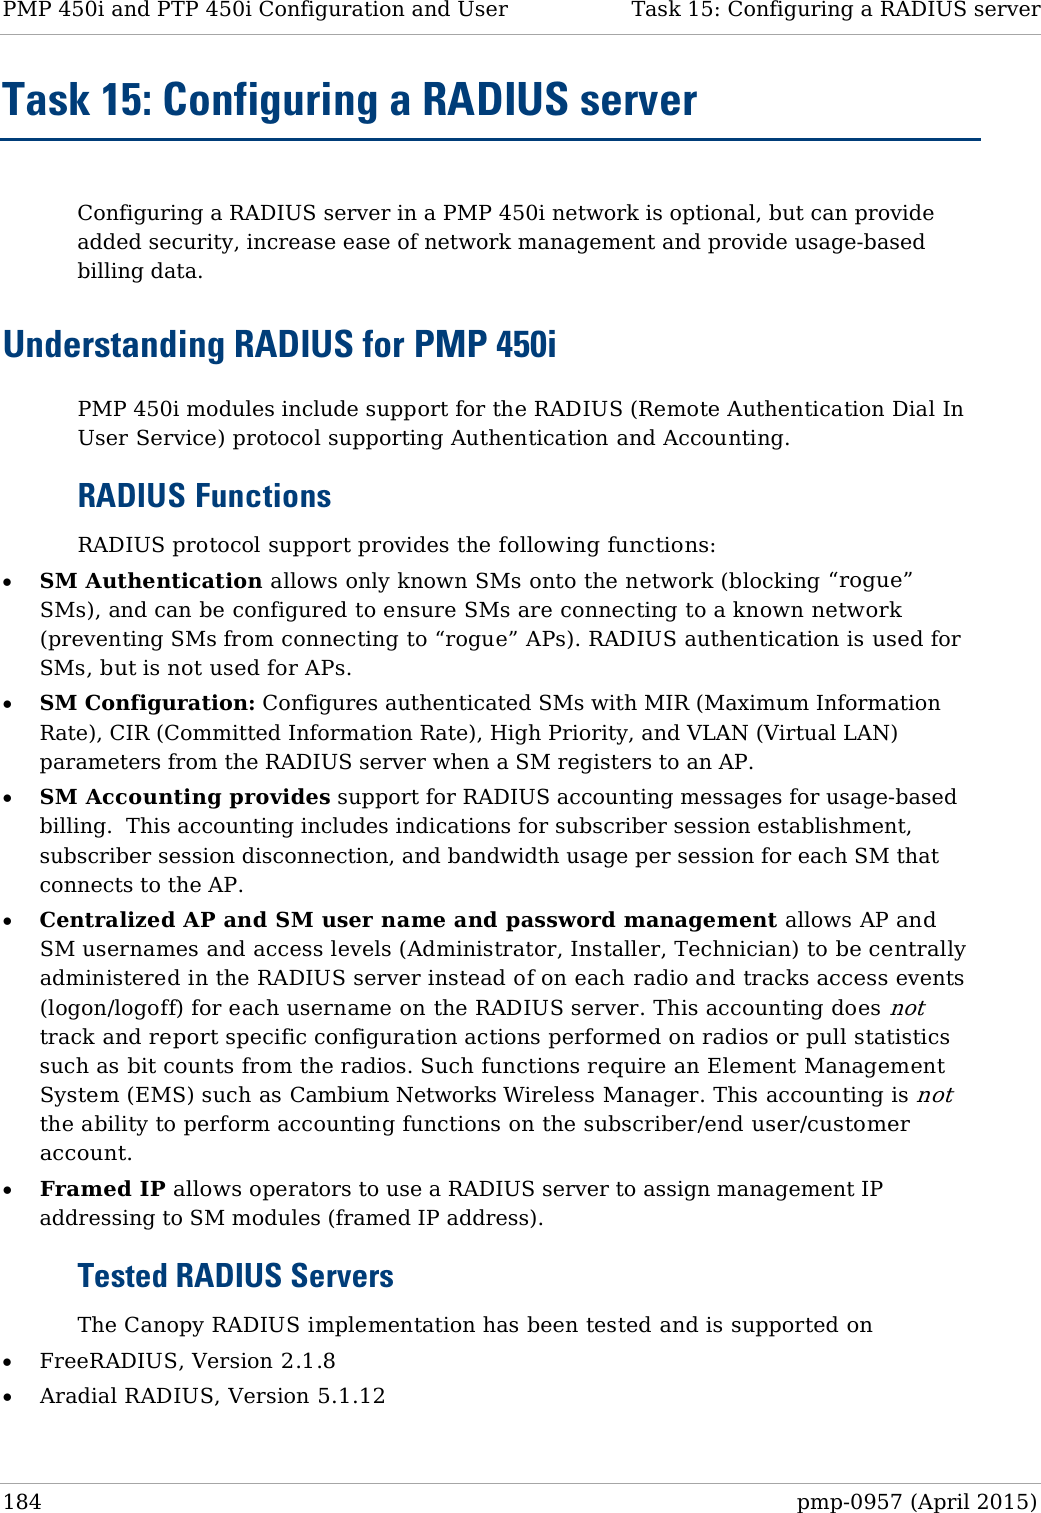 PMP 450i and PTP 450i Configuration and User   Task 15: Configuring a RADIUS server  Task 15: Configuring a RADIUS server  Configuring a RADIUS server in a PMP 450i network is optional, but can provide added security, increase ease of network management and provide usage-based billing data. Understanding RADIUS for PMP 450i PMP 450i modules include support for the RADIUS (Remote Authentication Dial In User Service) protocol supporting Authentication and Accounting. RADIUS Functions RADIUS protocol support provides the following functions: • SM Authentication allows only known SMs onto the network (blocking “rogue” SMs), and can be configured to ensure SMs are connecting to a known network (preventing SMs from connecting to “rogue” APs). RADIUS authentication is used for SMs, but is not used for APs. • SM Configuration: Configures authenticated SMs with MIR (Maximum Information Rate), CIR (Committed Information Rate), High Priority, and VLAN (Virtual LAN) parameters from the RADIUS server when a SM registers to an AP. • SM Accounting provides support for RADIUS accounting messages for usage-based billing.  This accounting includes indications for subscriber session establishment, subscriber session disconnection, and bandwidth usage per session for each SM that connects to the AP.   • Centralized AP and SM user name and password management allows AP and SM usernames and access levels (Administrator, Installer, Technician) to be centrally administered in the RADIUS server instead of on each radio and tracks access events (logon/logoff) for each username on the RADIUS server. This accounting does not track and report specific configuration actions performed on radios or pull statistics such as bit counts from the radios. Such functions require an Element Management System (EMS) such as Cambium Networks Wireless Manager. This accounting is not the ability to perform accounting functions on the subscriber/end user/customer account. • Framed IP allows operators to use a RADIUS server to assign management IP addressing to SM modules (framed IP address). Tested RADIUS Servers The Canopy RADIUS implementation has been tested and is supported on • FreeRADIUS, Version 2.1.8 • Aradial RADIUS, Version 5.1.12  184  pmp-0957 (April 2015)  